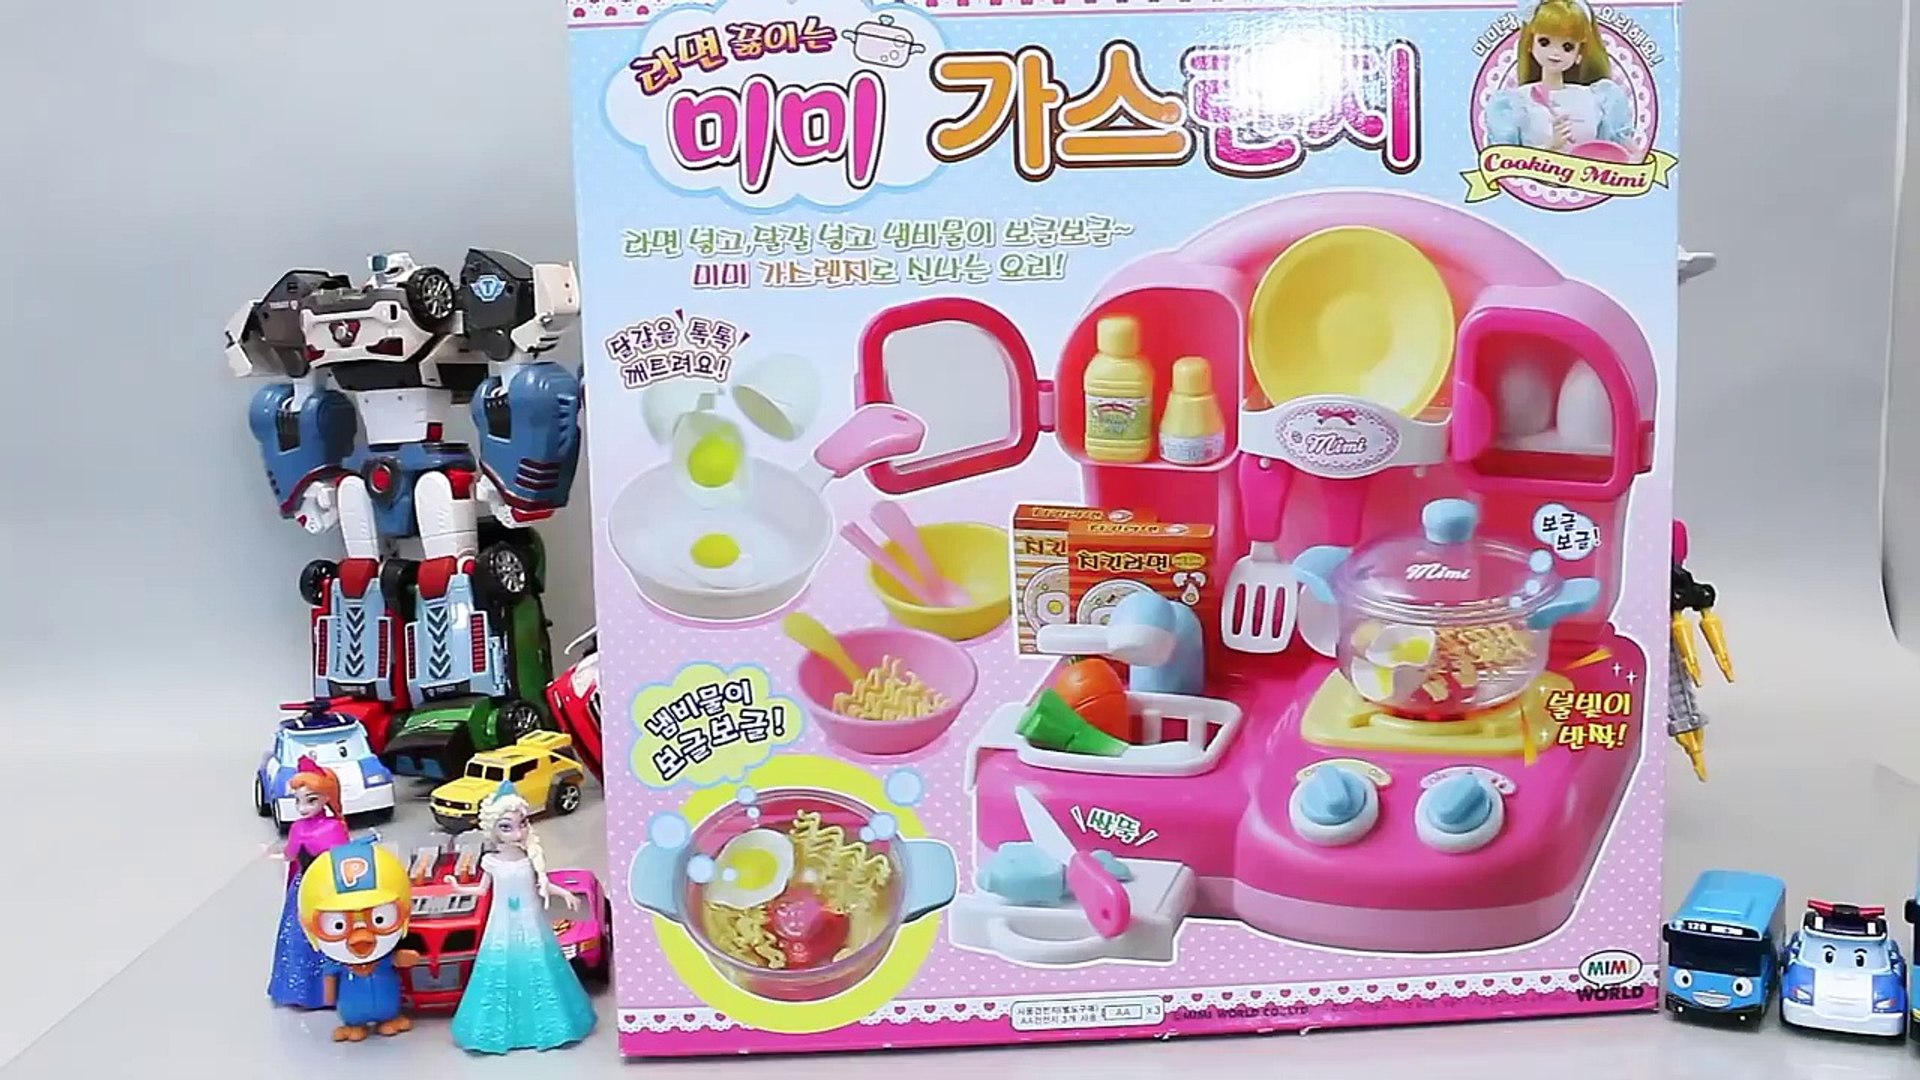 Cooking Toys For Kids Ramen Cook Kitchen Toy - video Dailymotion